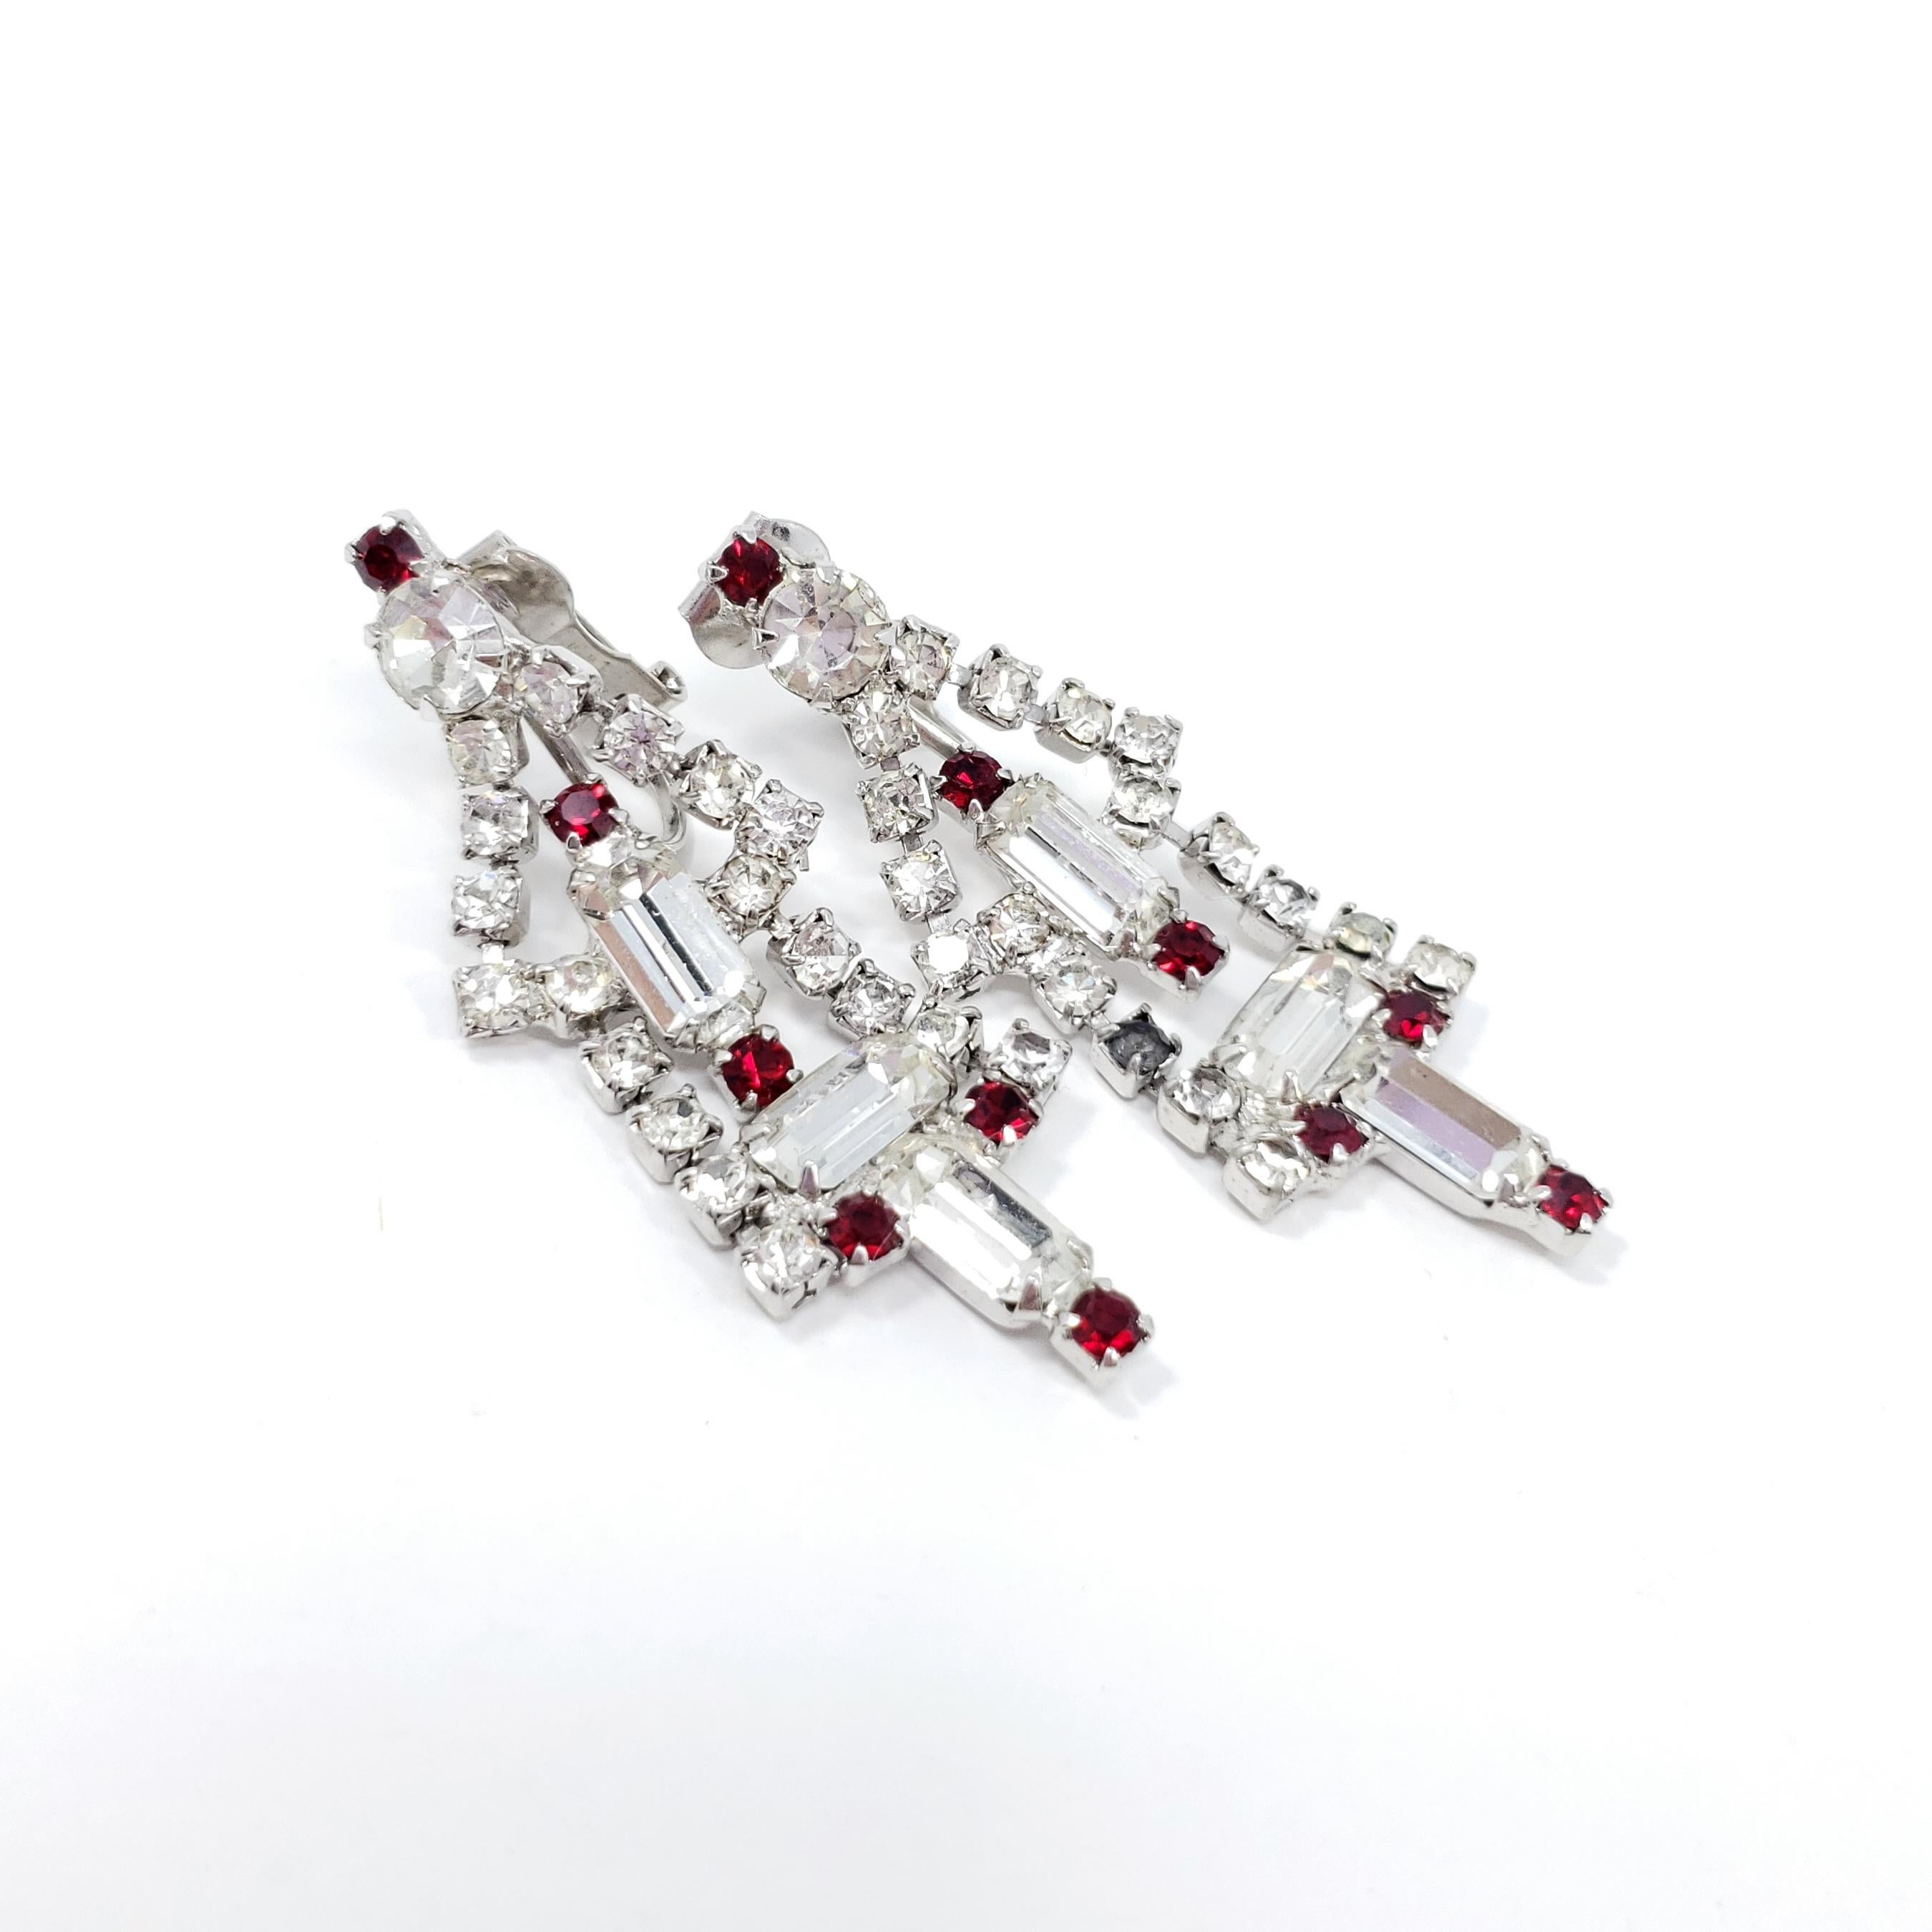 Stylish, glittering art-deco clip on earrings. Round and baguette-cut crystals, prong-set in a dangling deco setting.

Silver-tone.